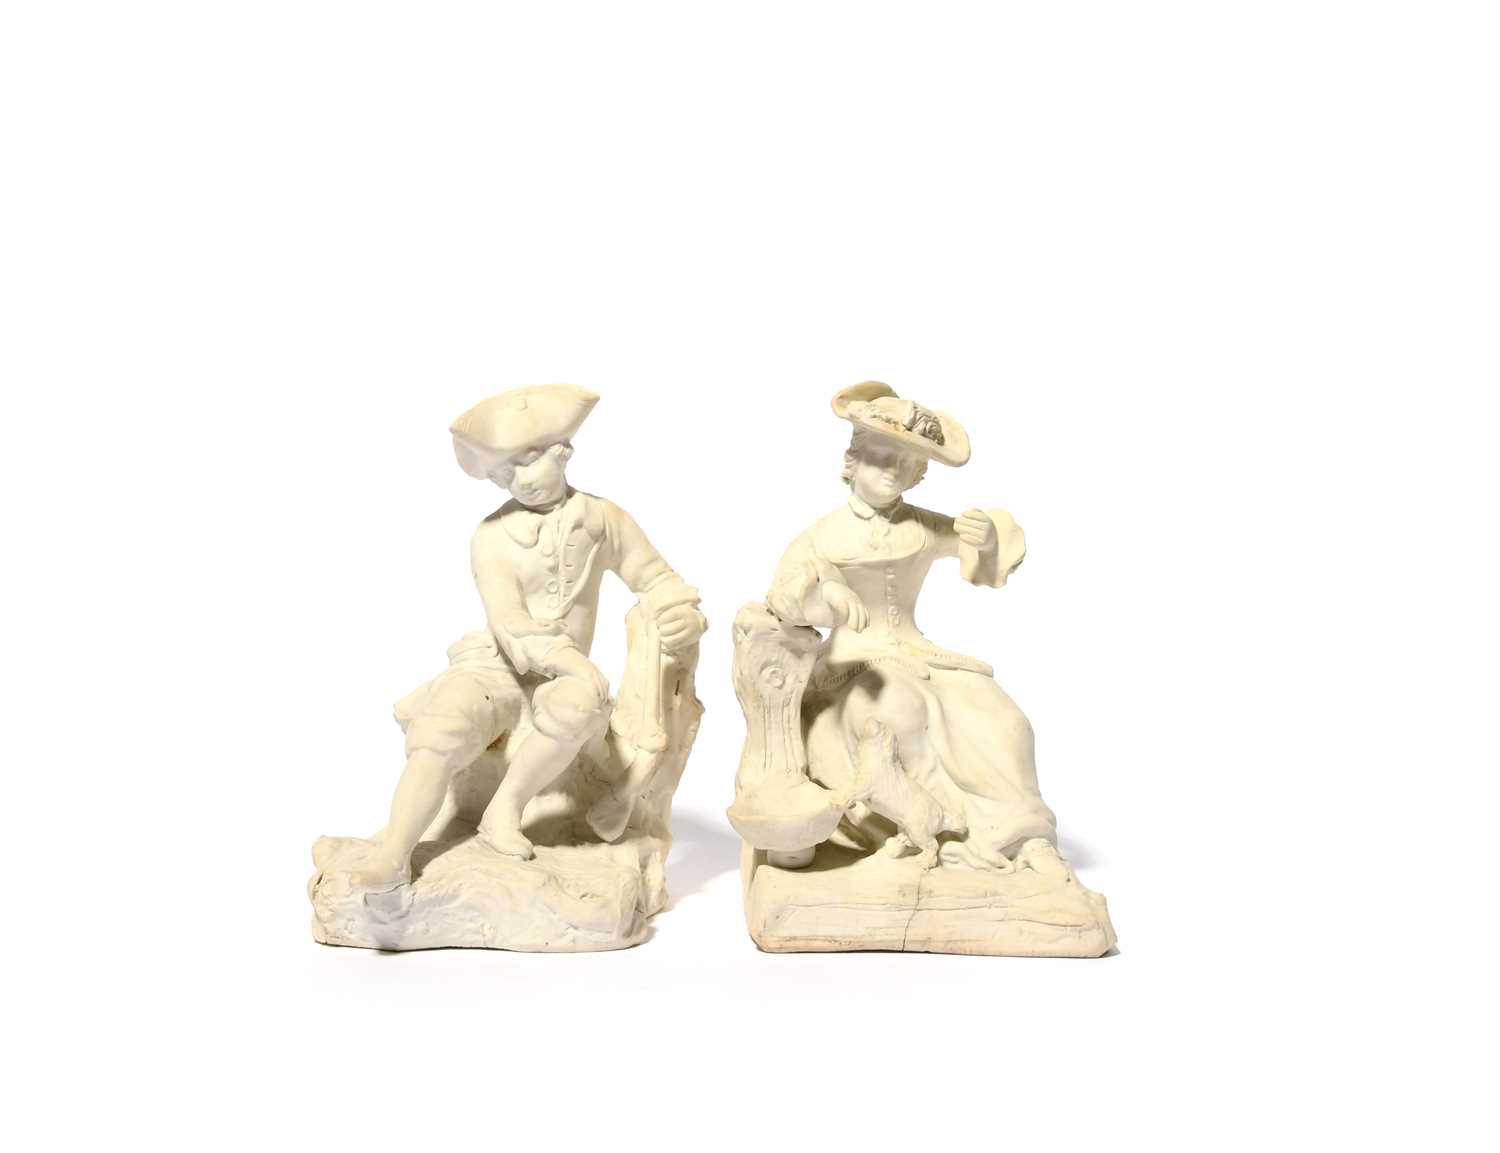 A pair of early Bow biscuit porcelain figures of a huntsman and his companion, c.1752-53, he